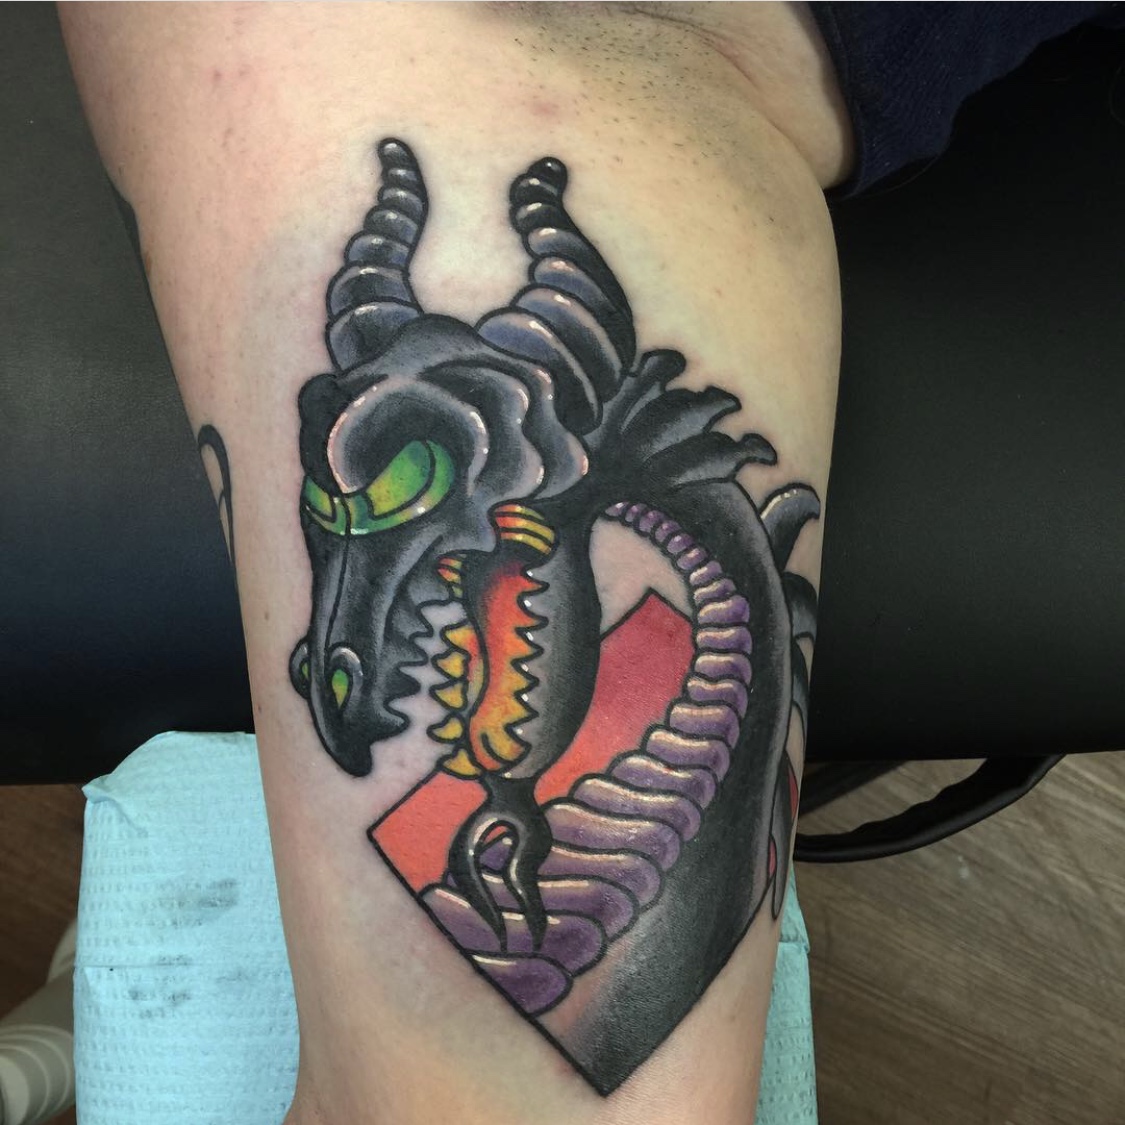 Tattoo of a Dragon on a girl's inner arm